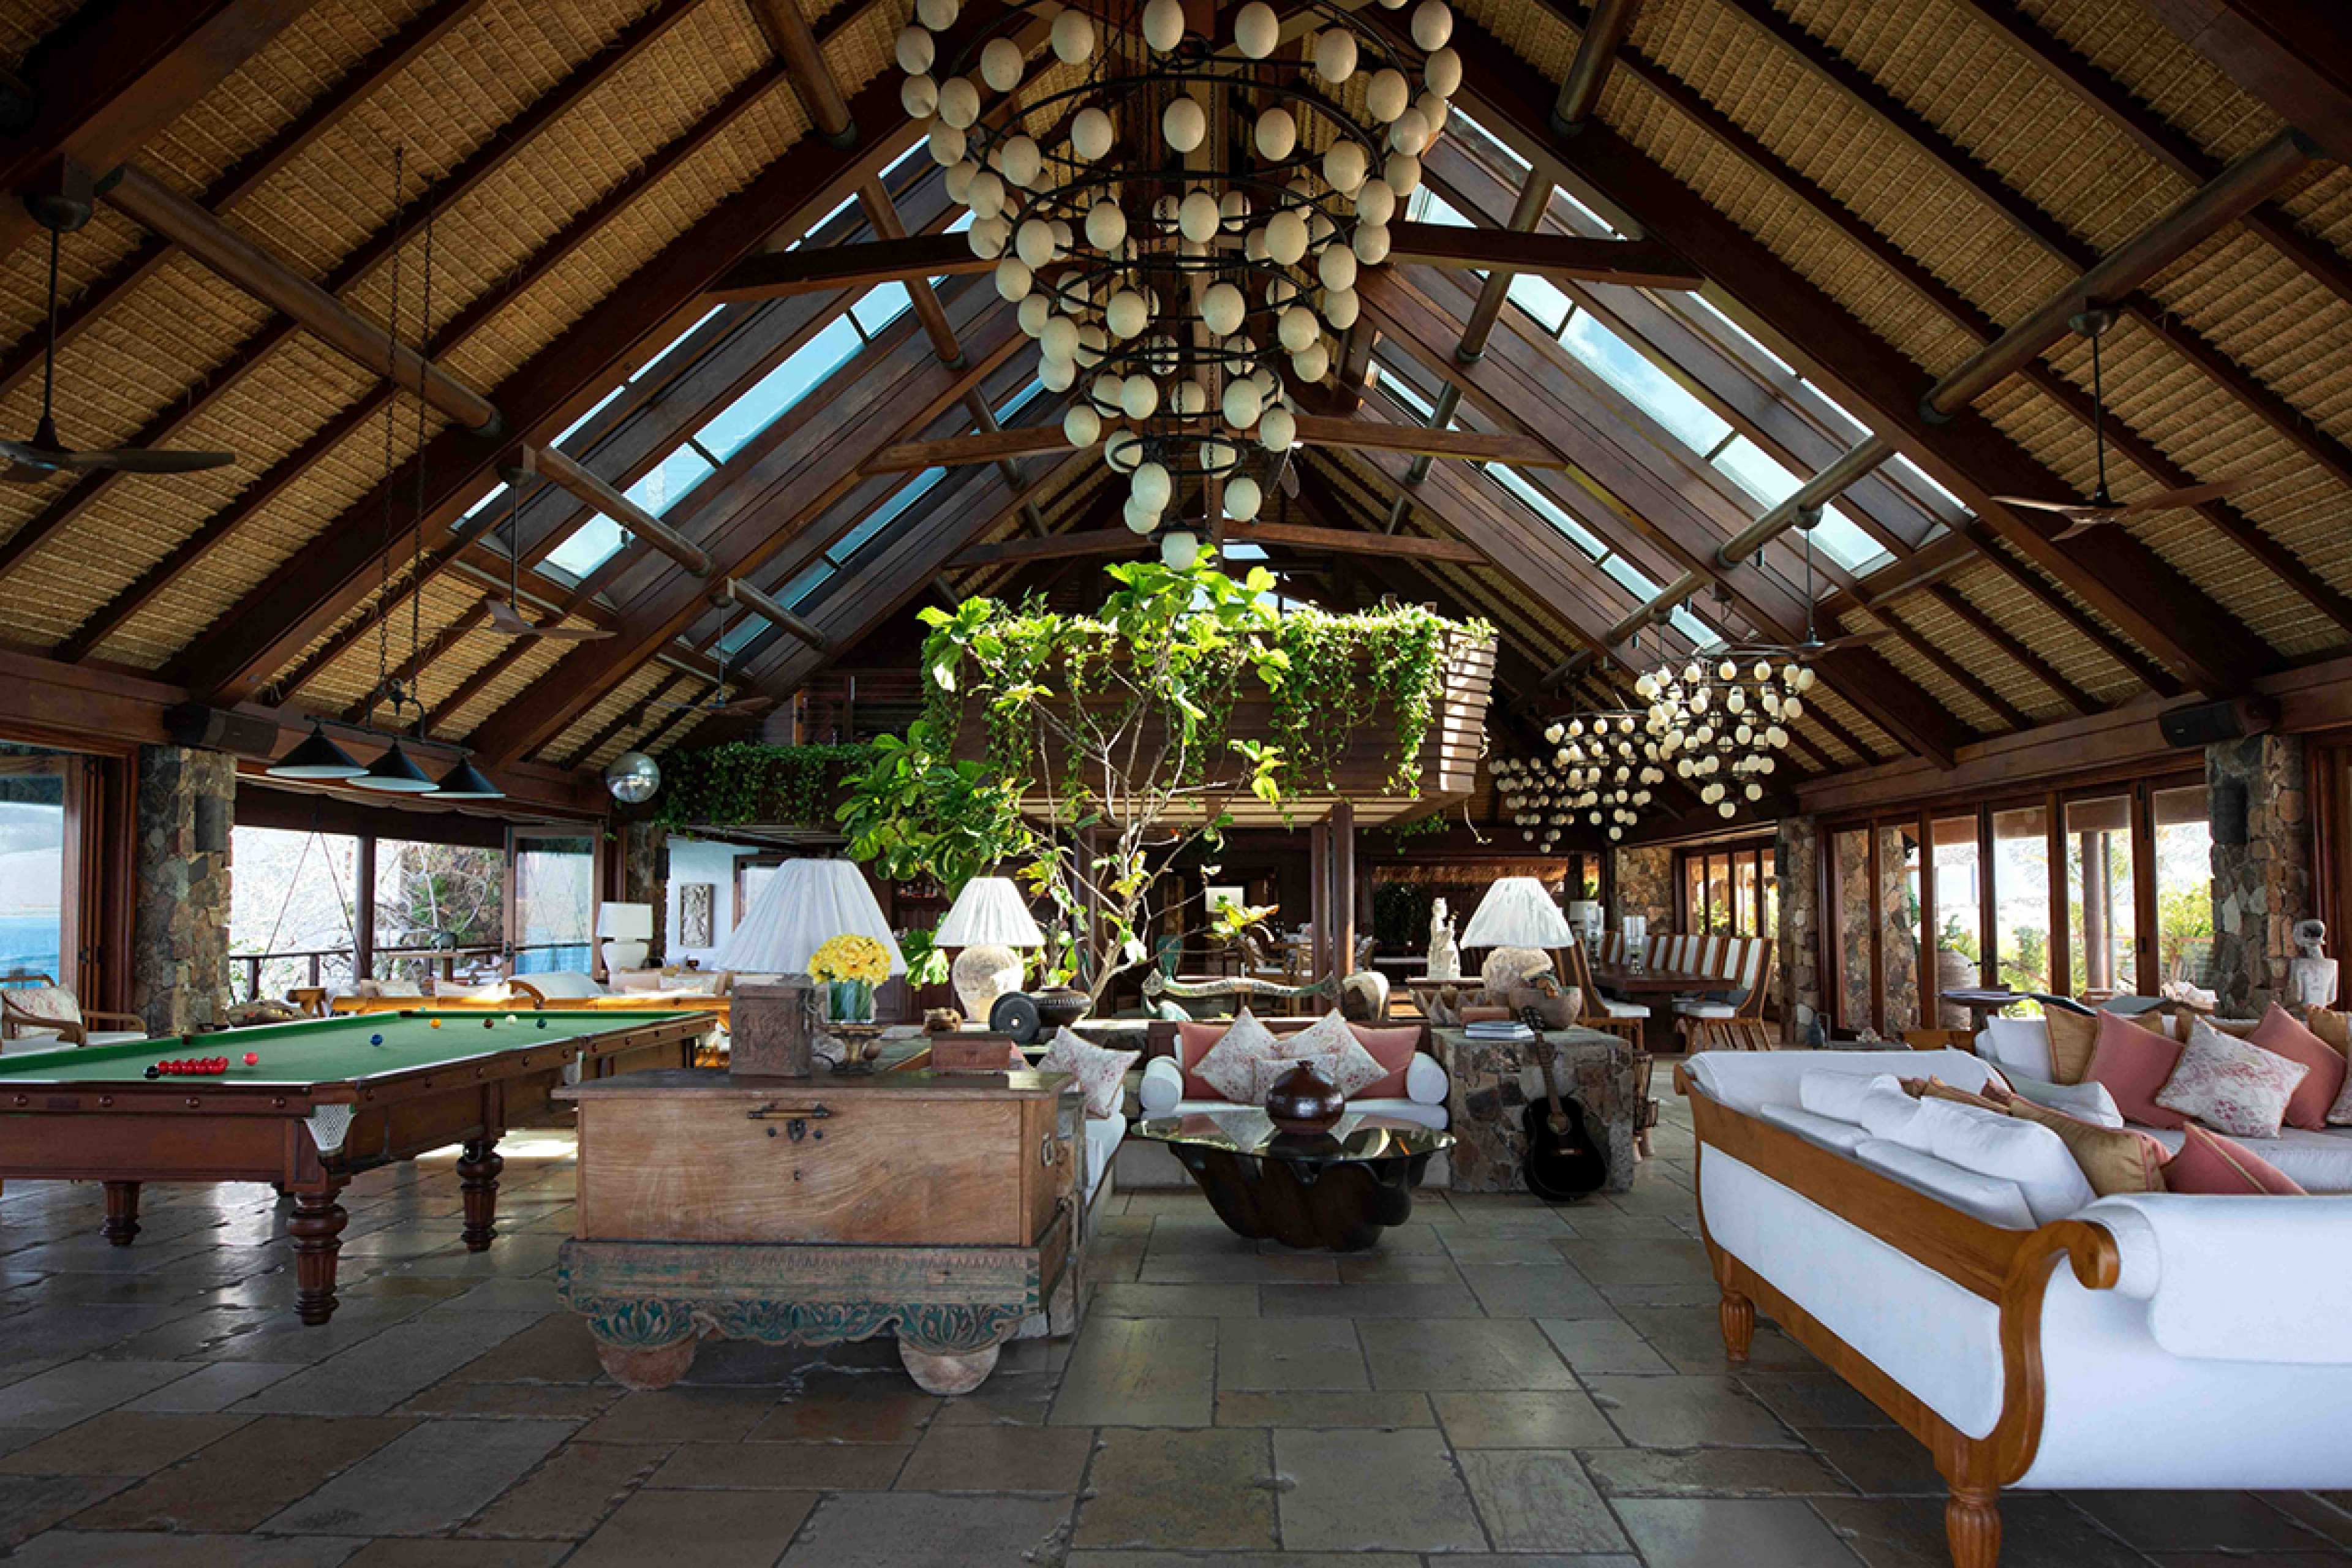 Lounge area with tables and chairs and a pool table in a large open air hut